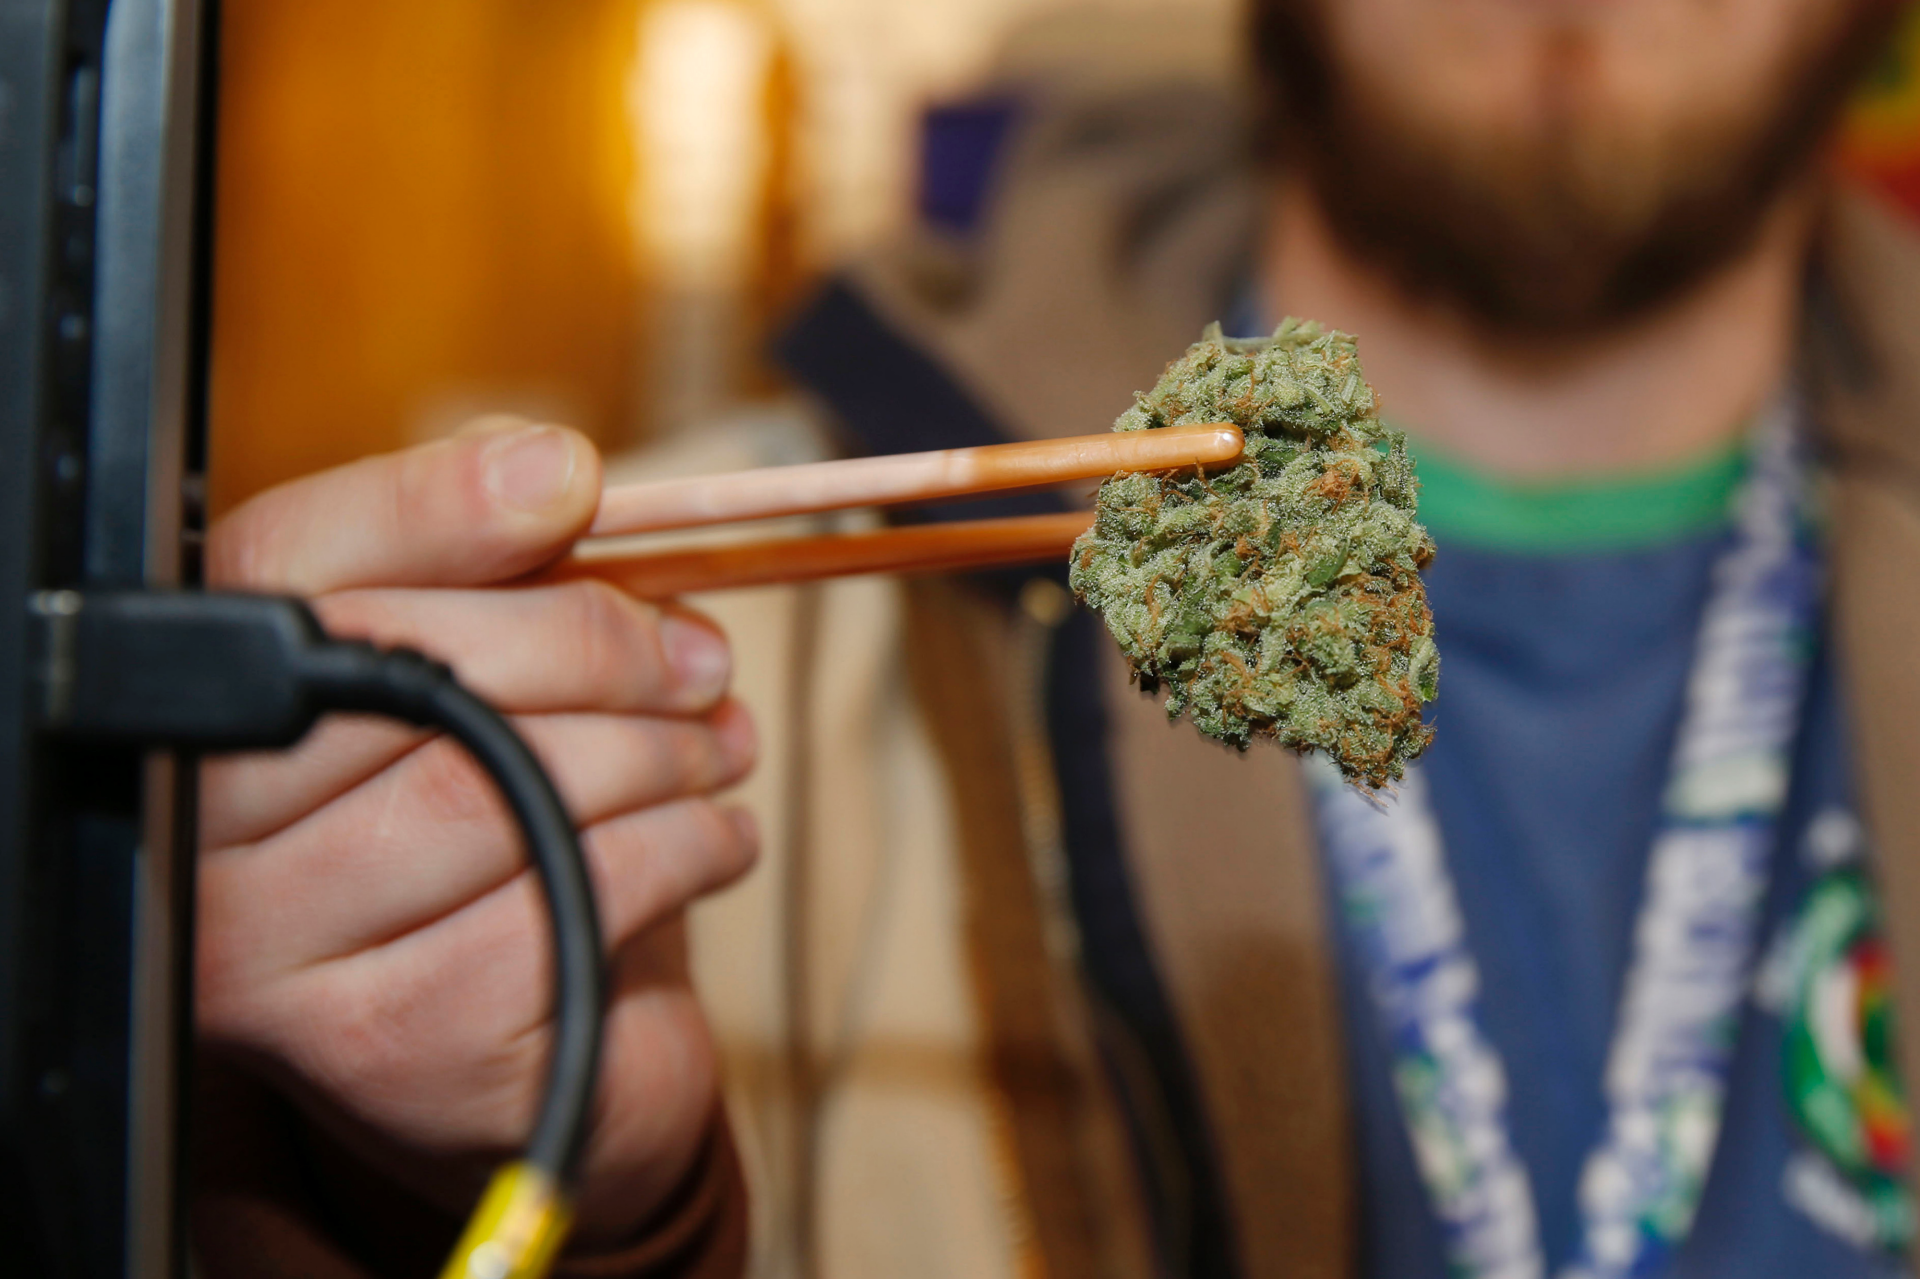 Smoking strong pot daily could raise psychosis risk, study finds | Fox News